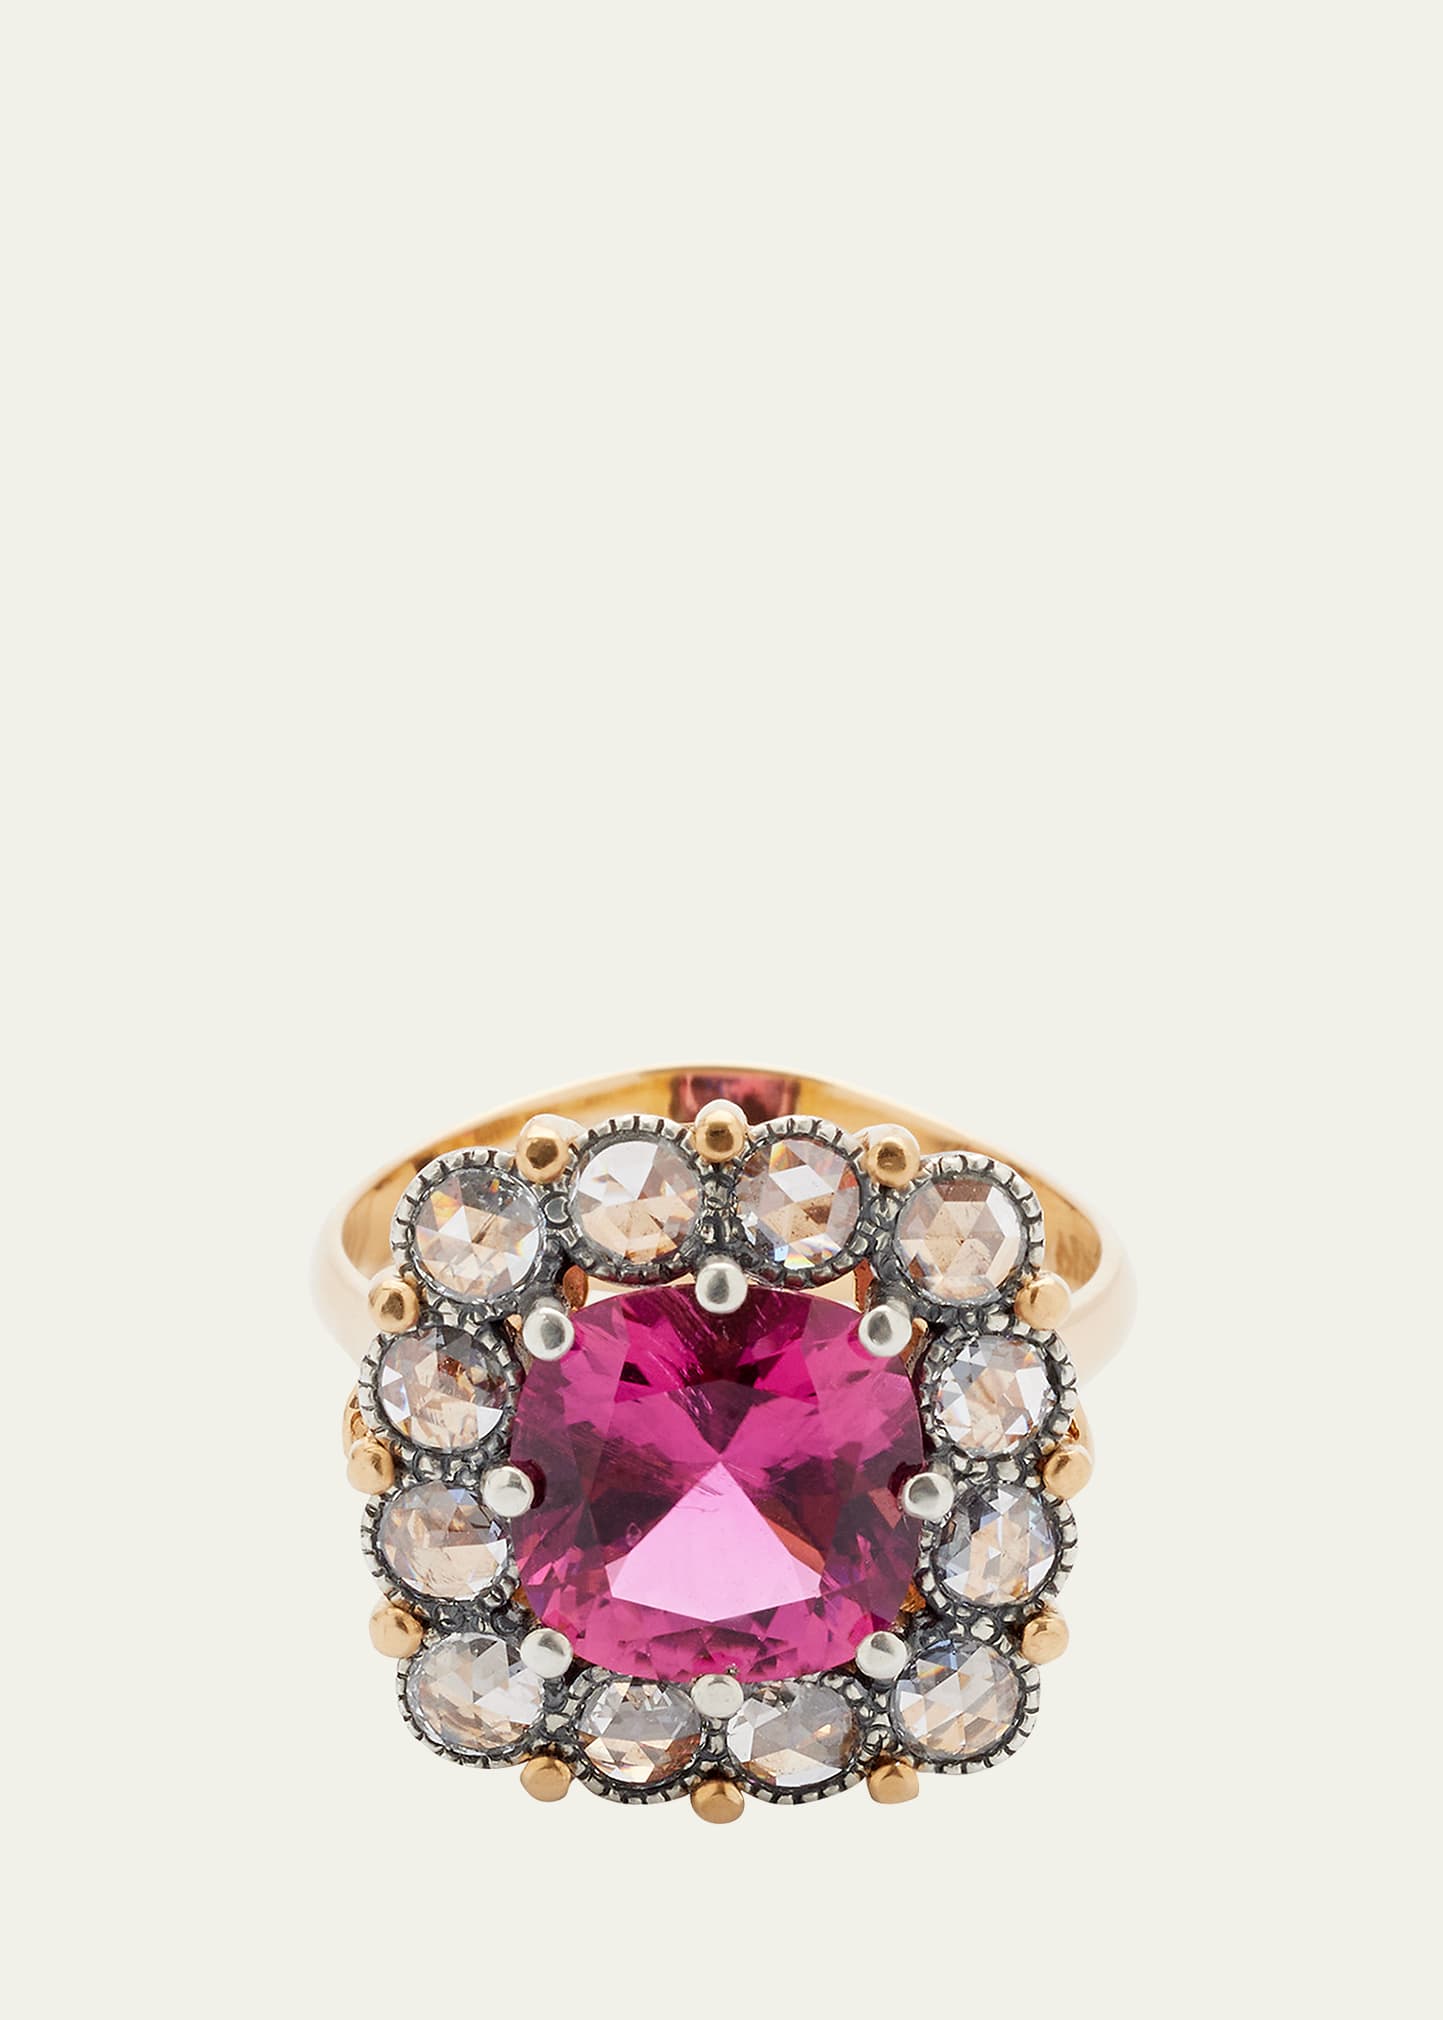 Arman Sarkisyan Rubellite Ring With Diamonds In 22k Gold And Silver In Yg